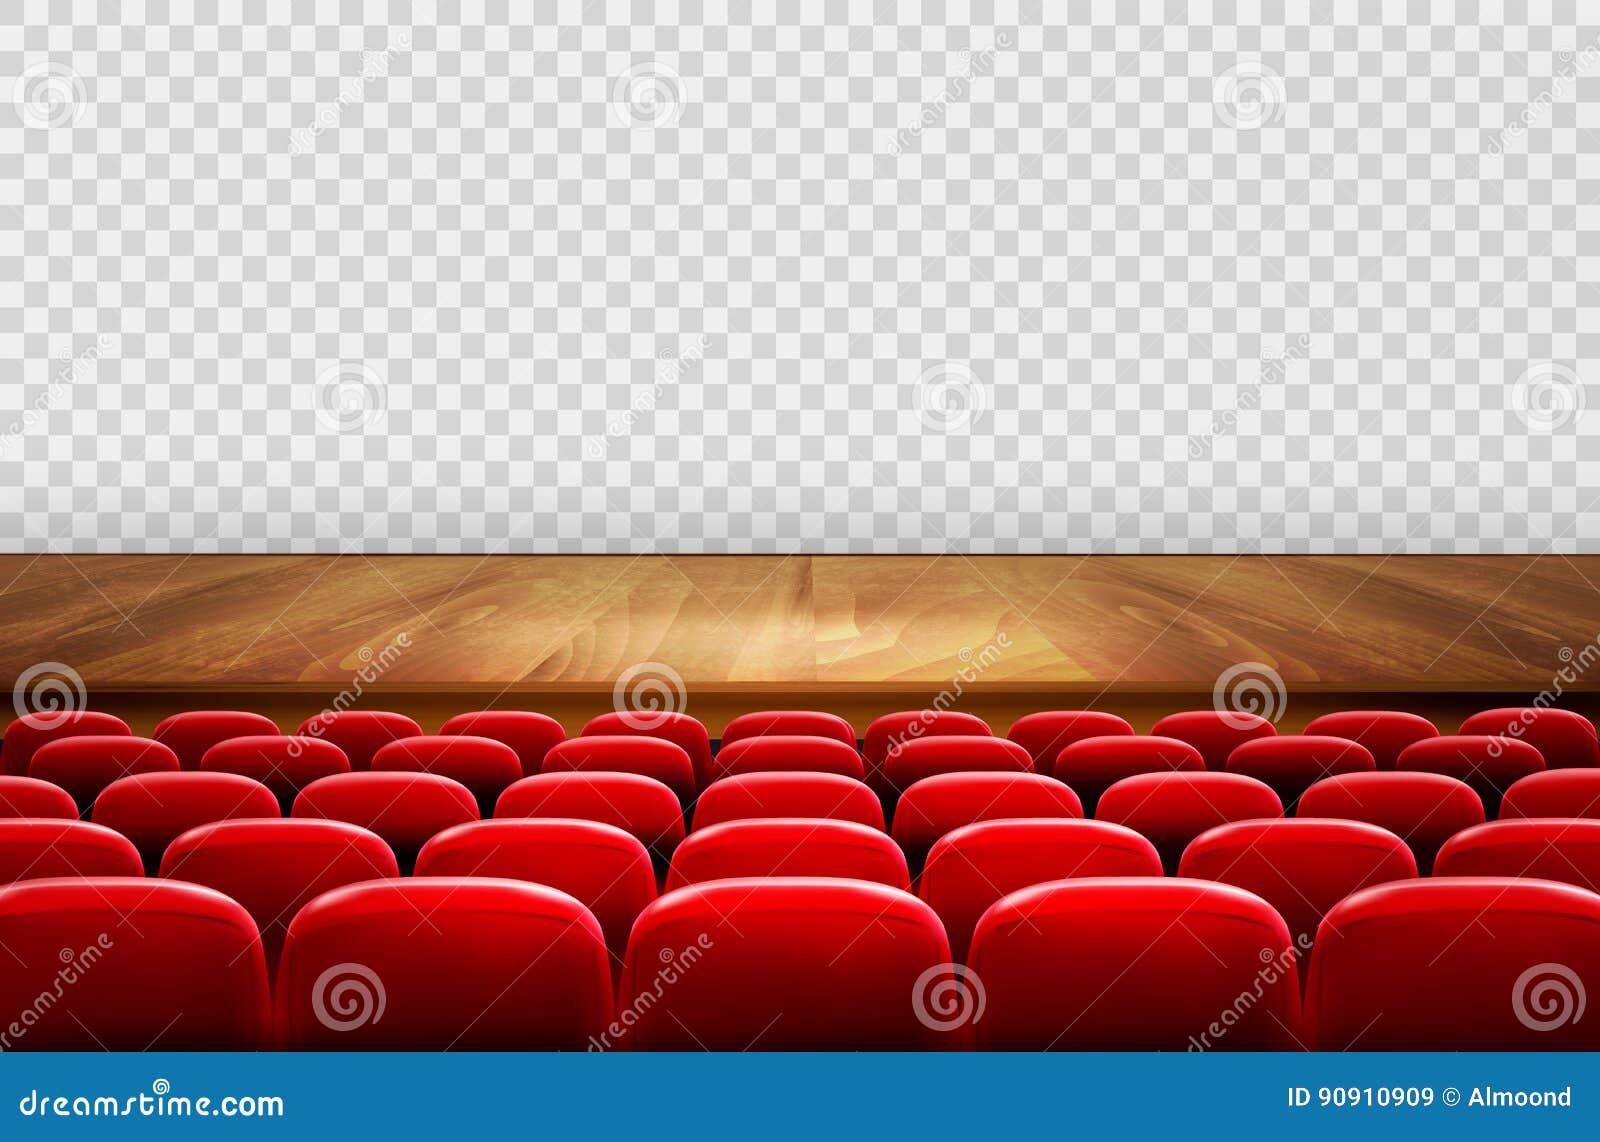 Rows of Red Cinema or Theater Seats in Front Stock Vector - Illustration of  culture, musical: 90910909